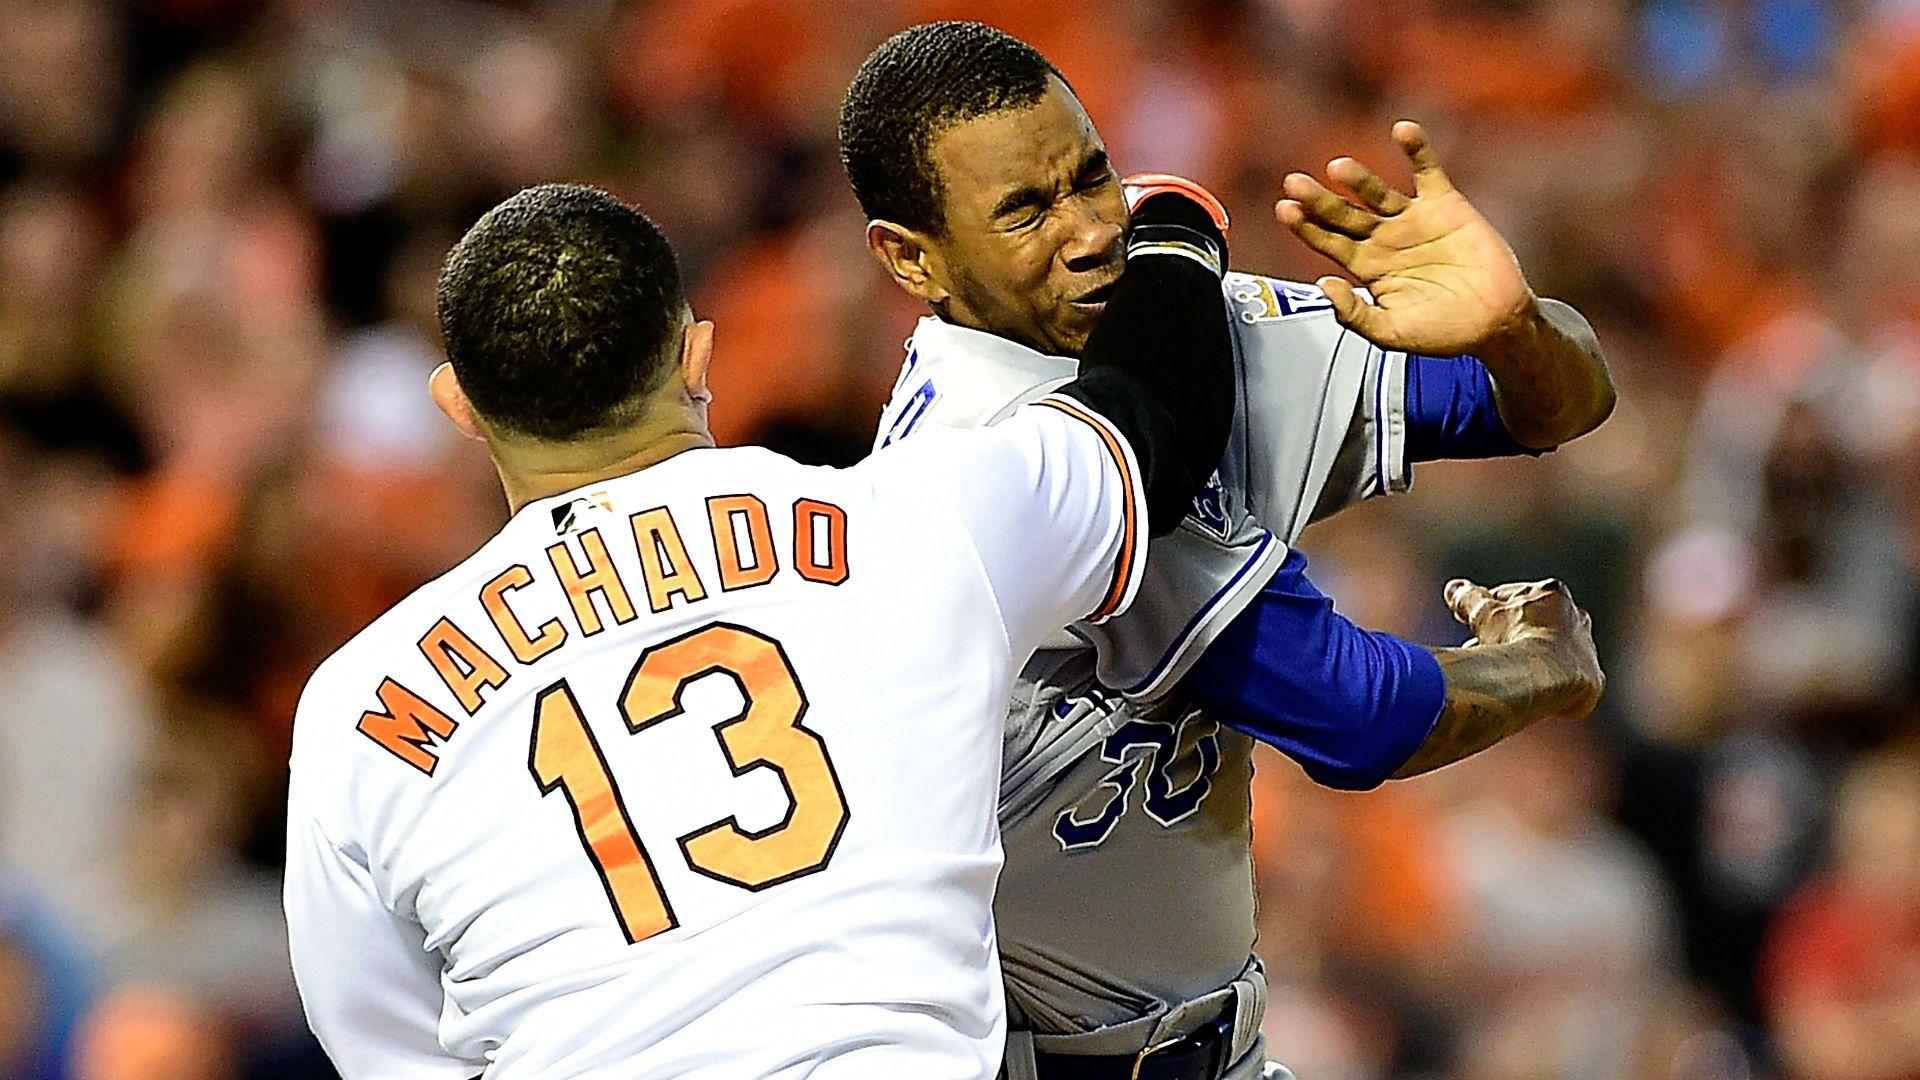 WATCH: Manny Machado charges mound after HBP, brawls with Yordano